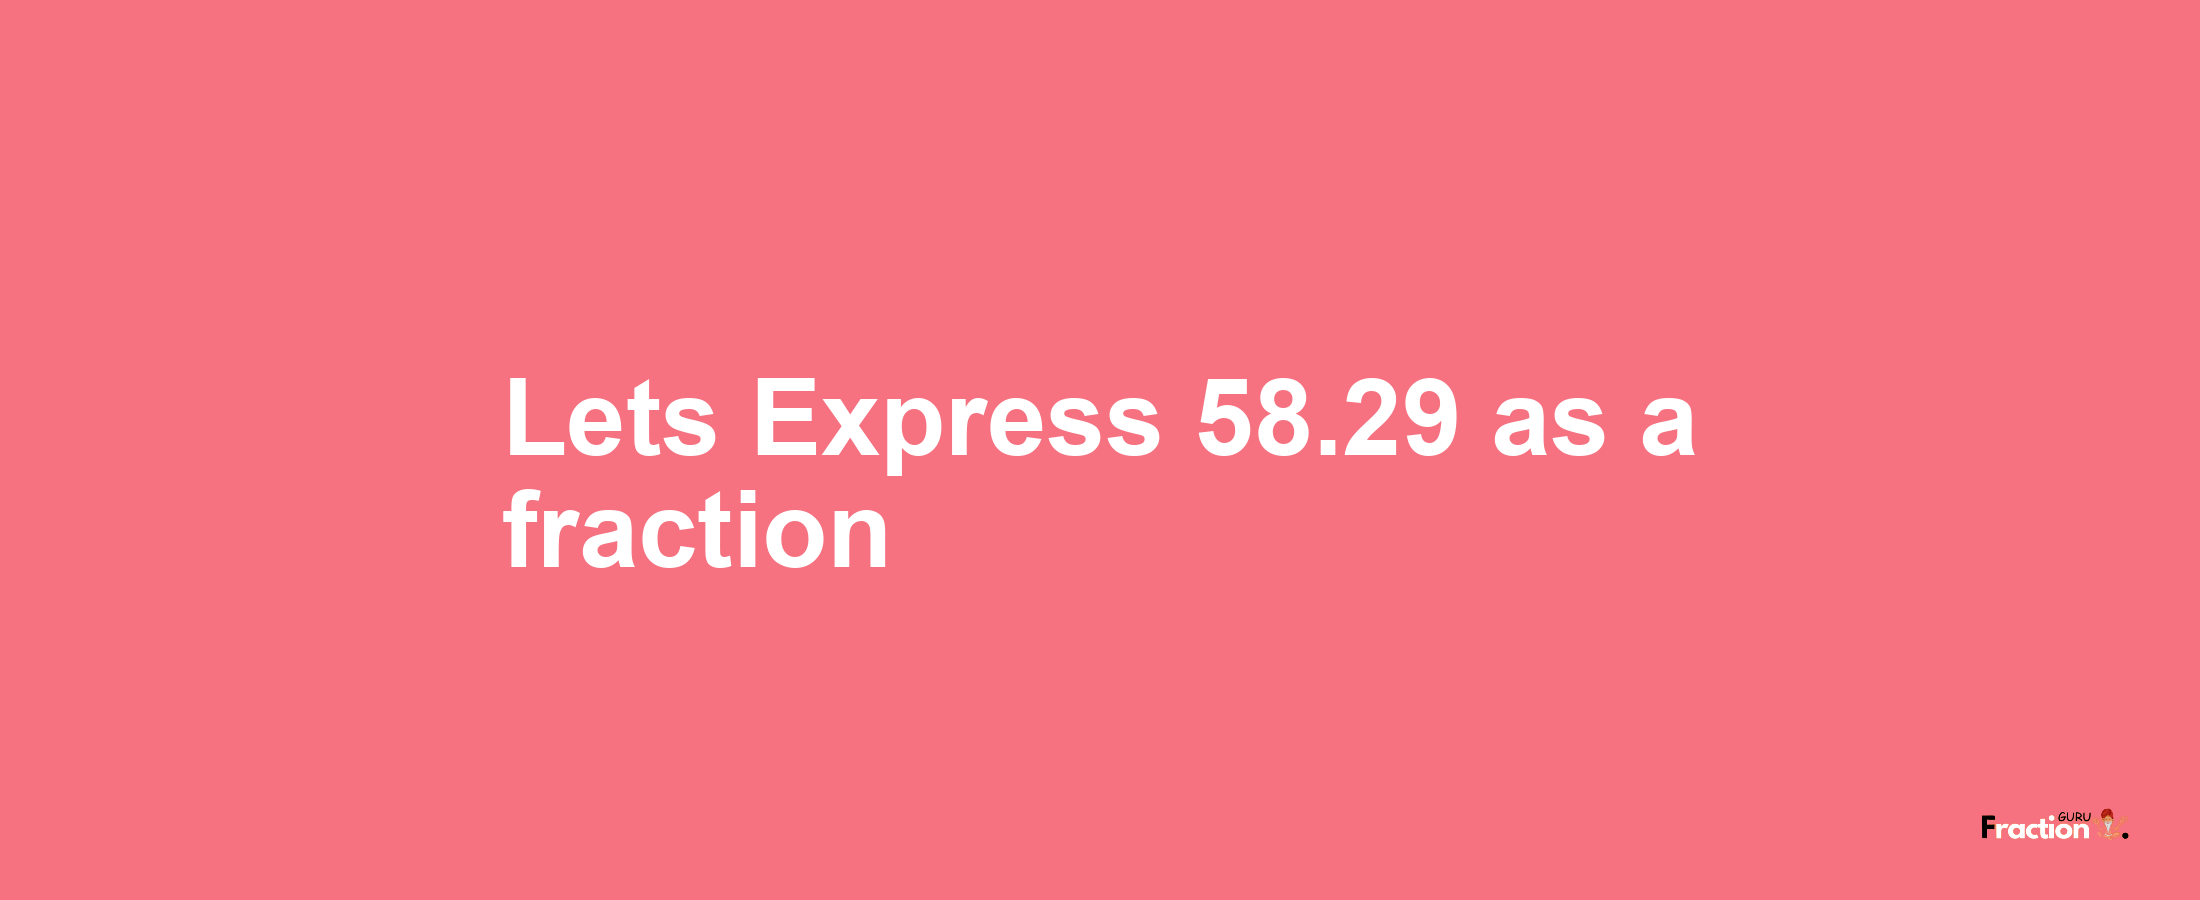 Lets Express 58.29 as afraction